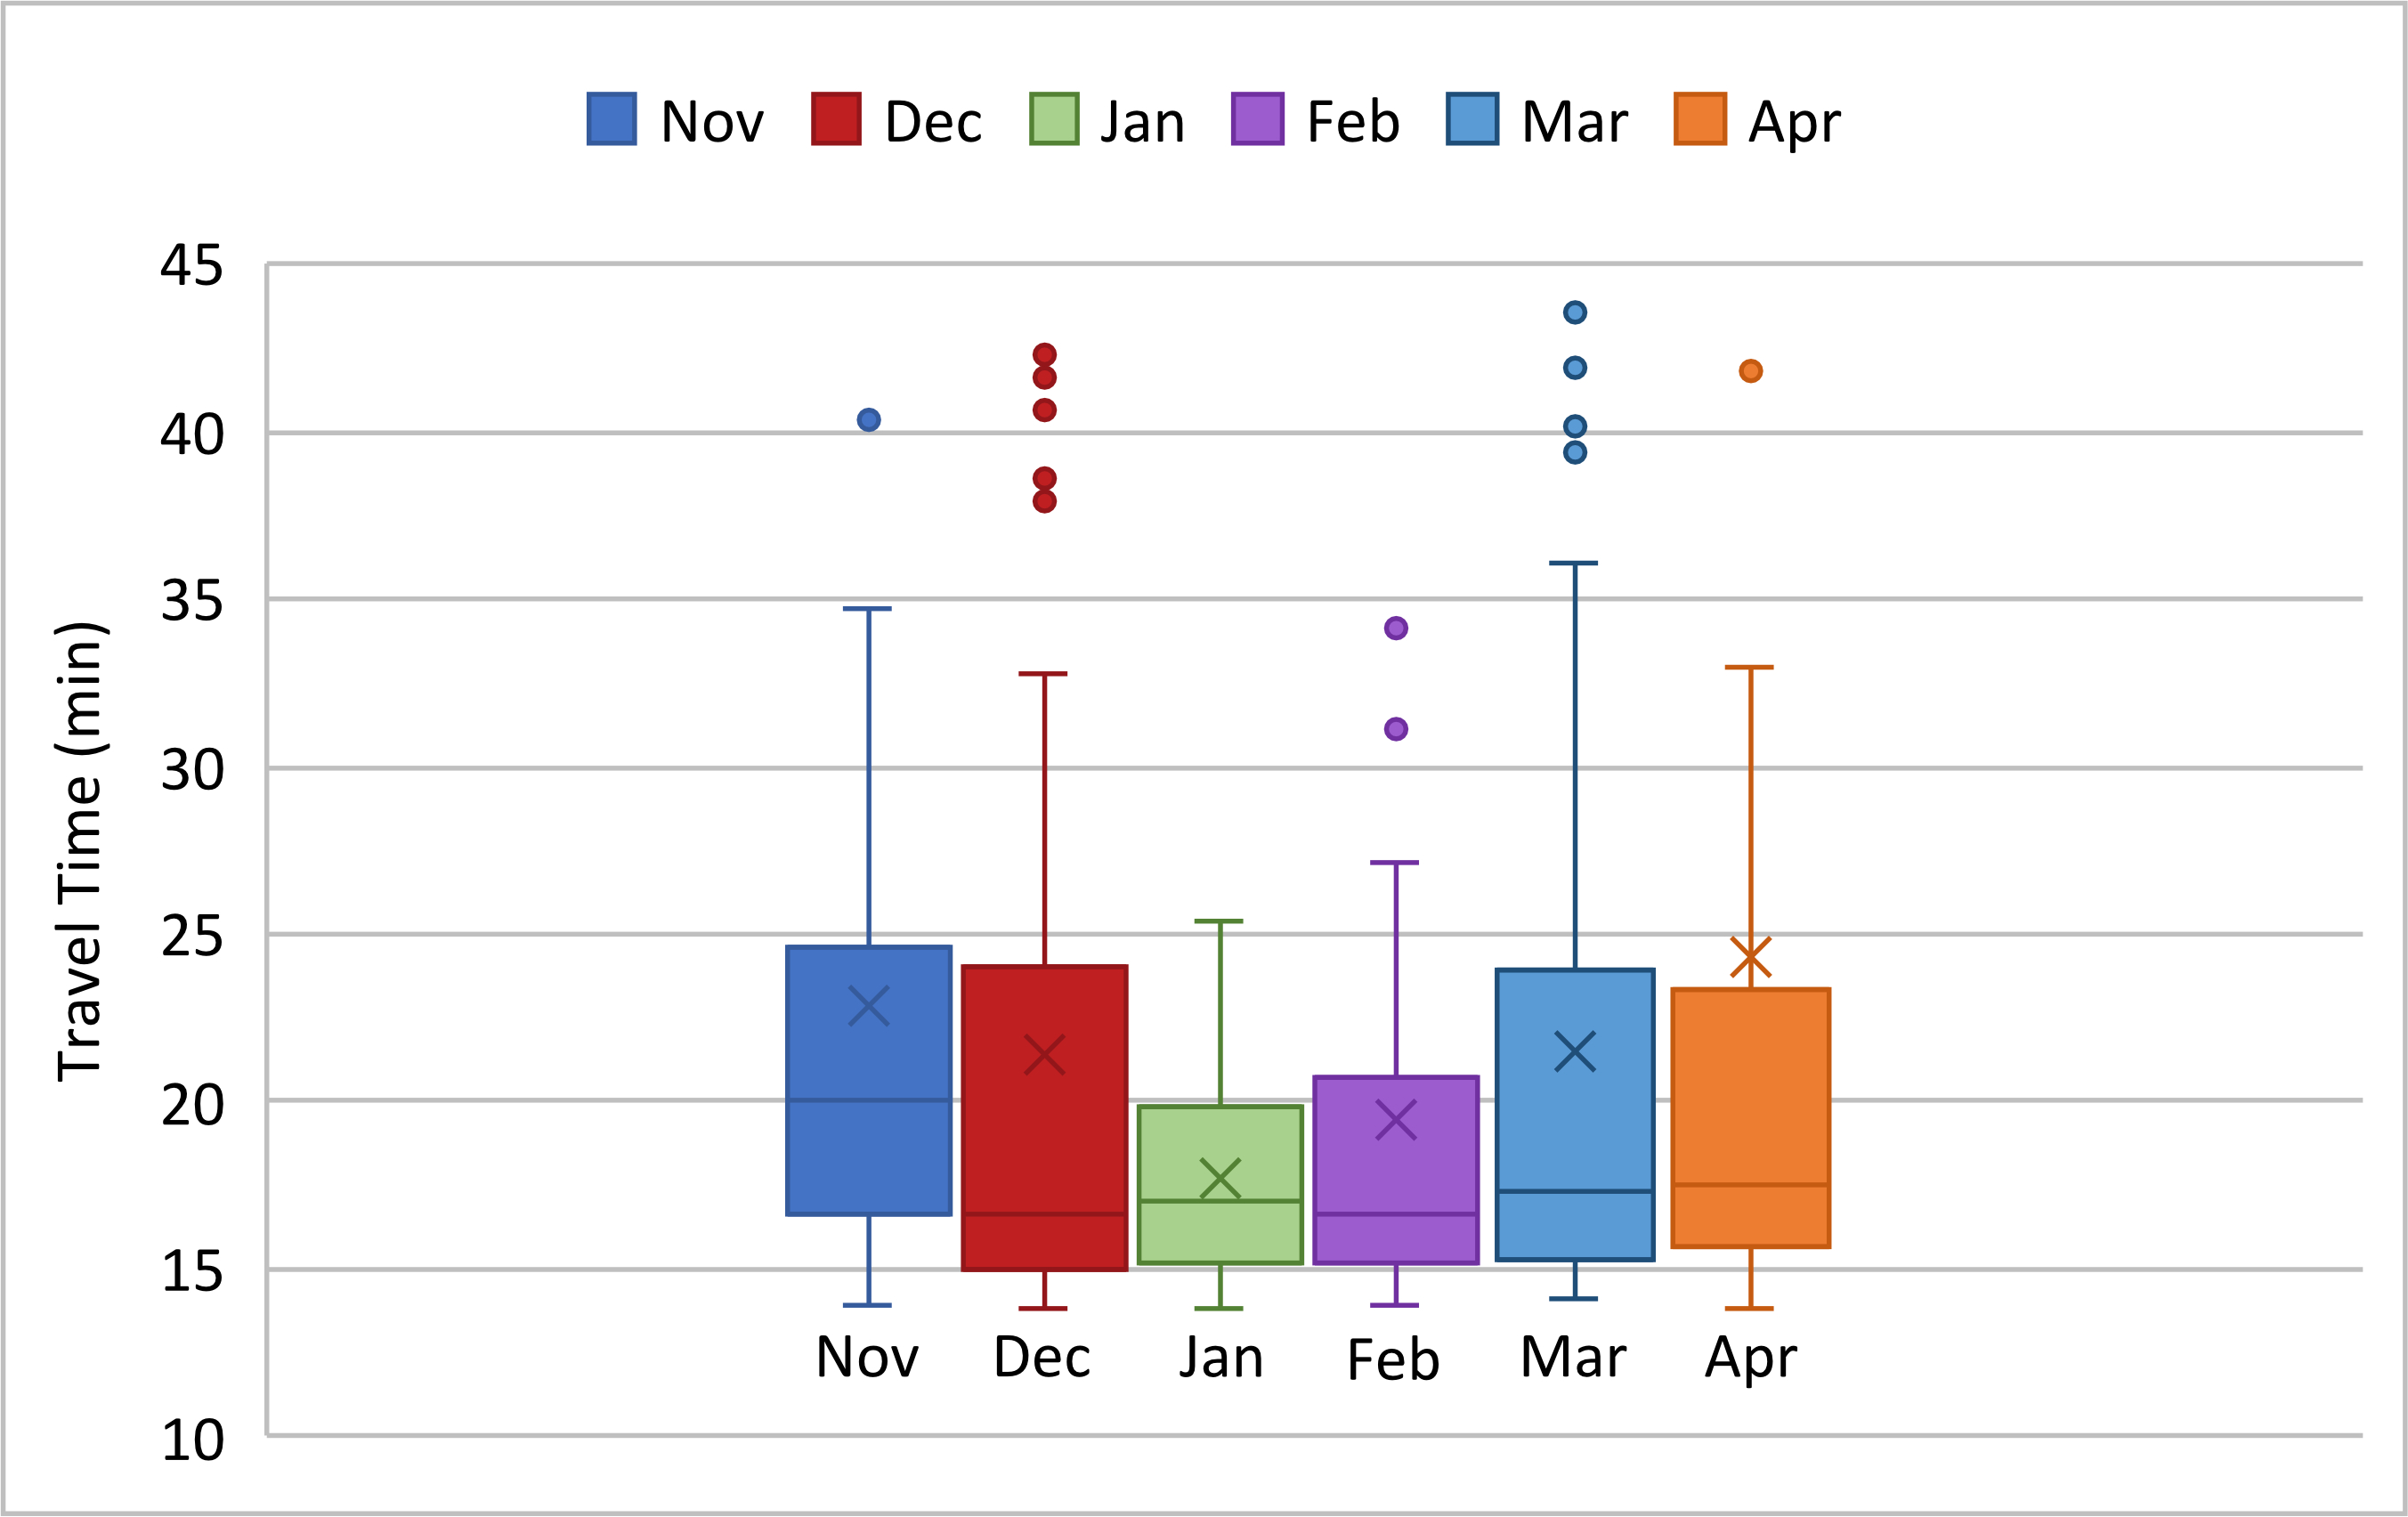 A box and whisker plot is shown for travel time each month between November and April.  Units are in minutes.  For November, the box goes from about 17 to 25 and the whisker goes from about 14 to 35 with an outlier just above 40.  For December, the box goes from about 15 to 25 and the whisker goes from about 14 to 33 with five outliers between 37 and 43.  For January, the box goes from about 15 to 20 and the whisker goes from about 14 to 25 with no outliers.  For February, the box goes from about 15 to 21 and the whisker goes from about 14 to 28 with two outliers between 31 and 35.  For March, the box goes from about 15 to 24 and the whisker goes from about 14 to 36 with four outliers between 39 and 44.  For April, the box goes from about 16 to 24 and the whisker goes from about 14 to 33 with an outlier around 42.